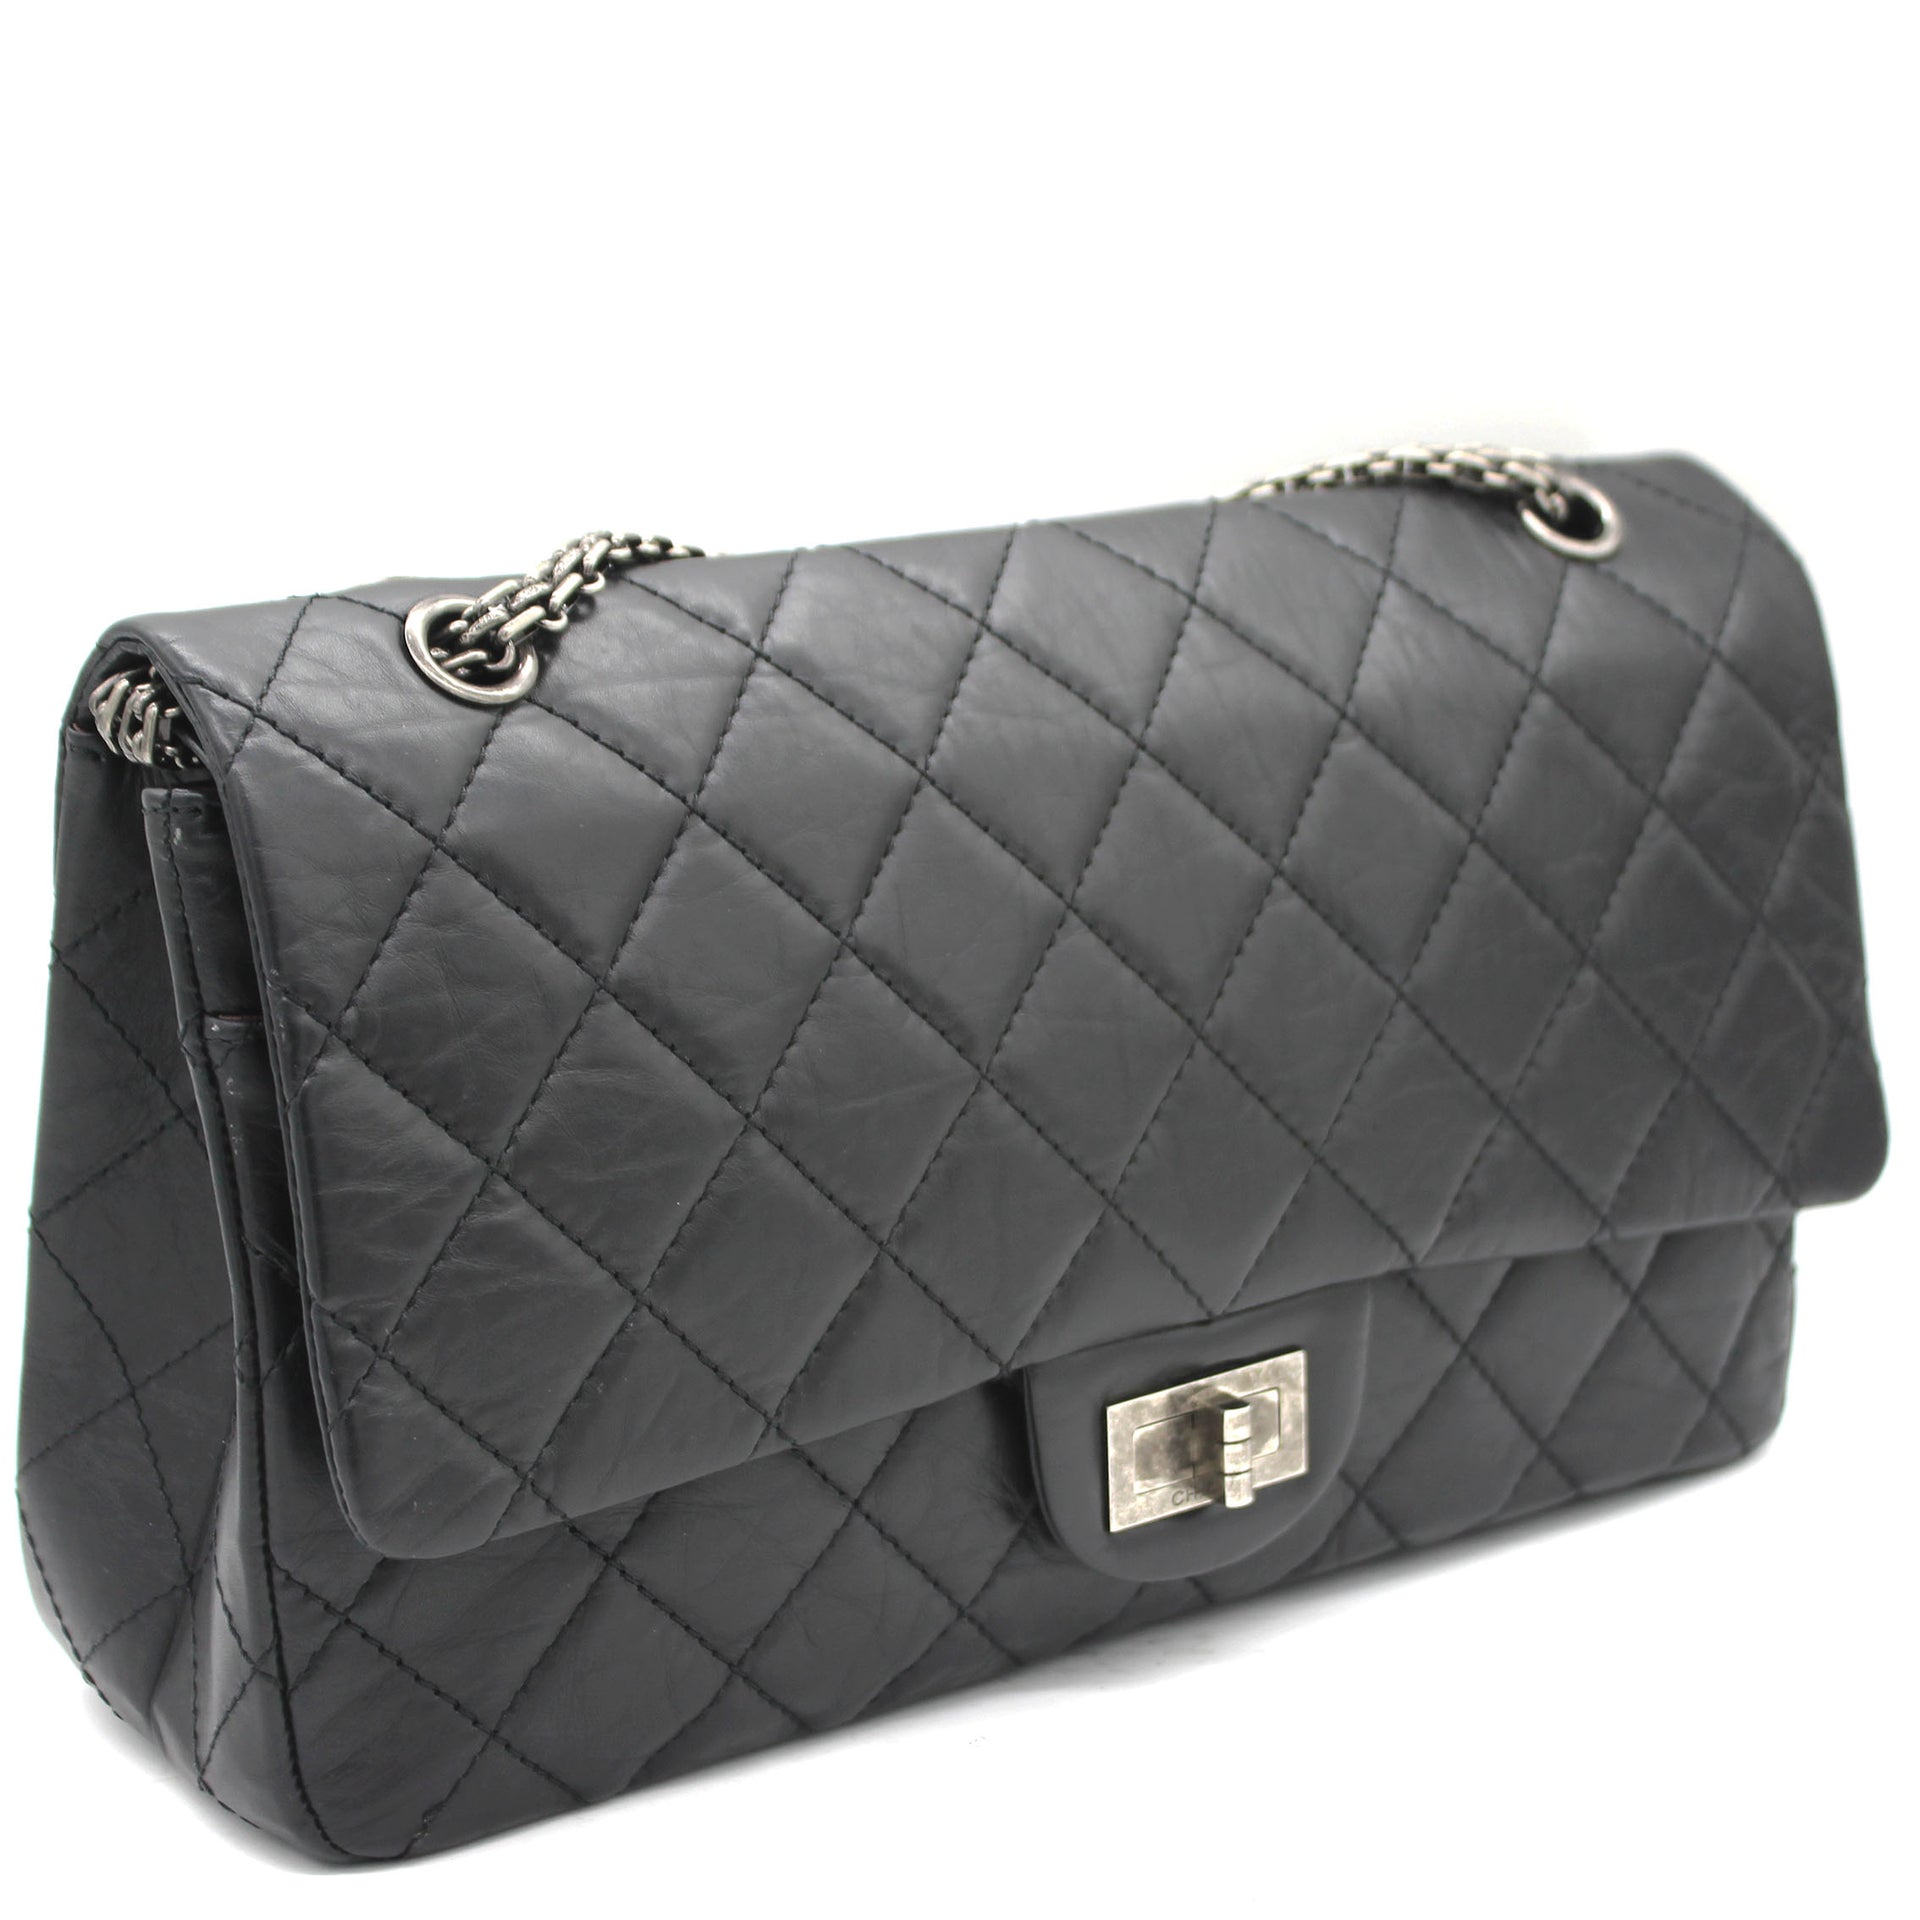 Chanel Metallic Silver Quilted Striped Leather Jumbo 2.55 Reissue Double  Flap Bag Chanel